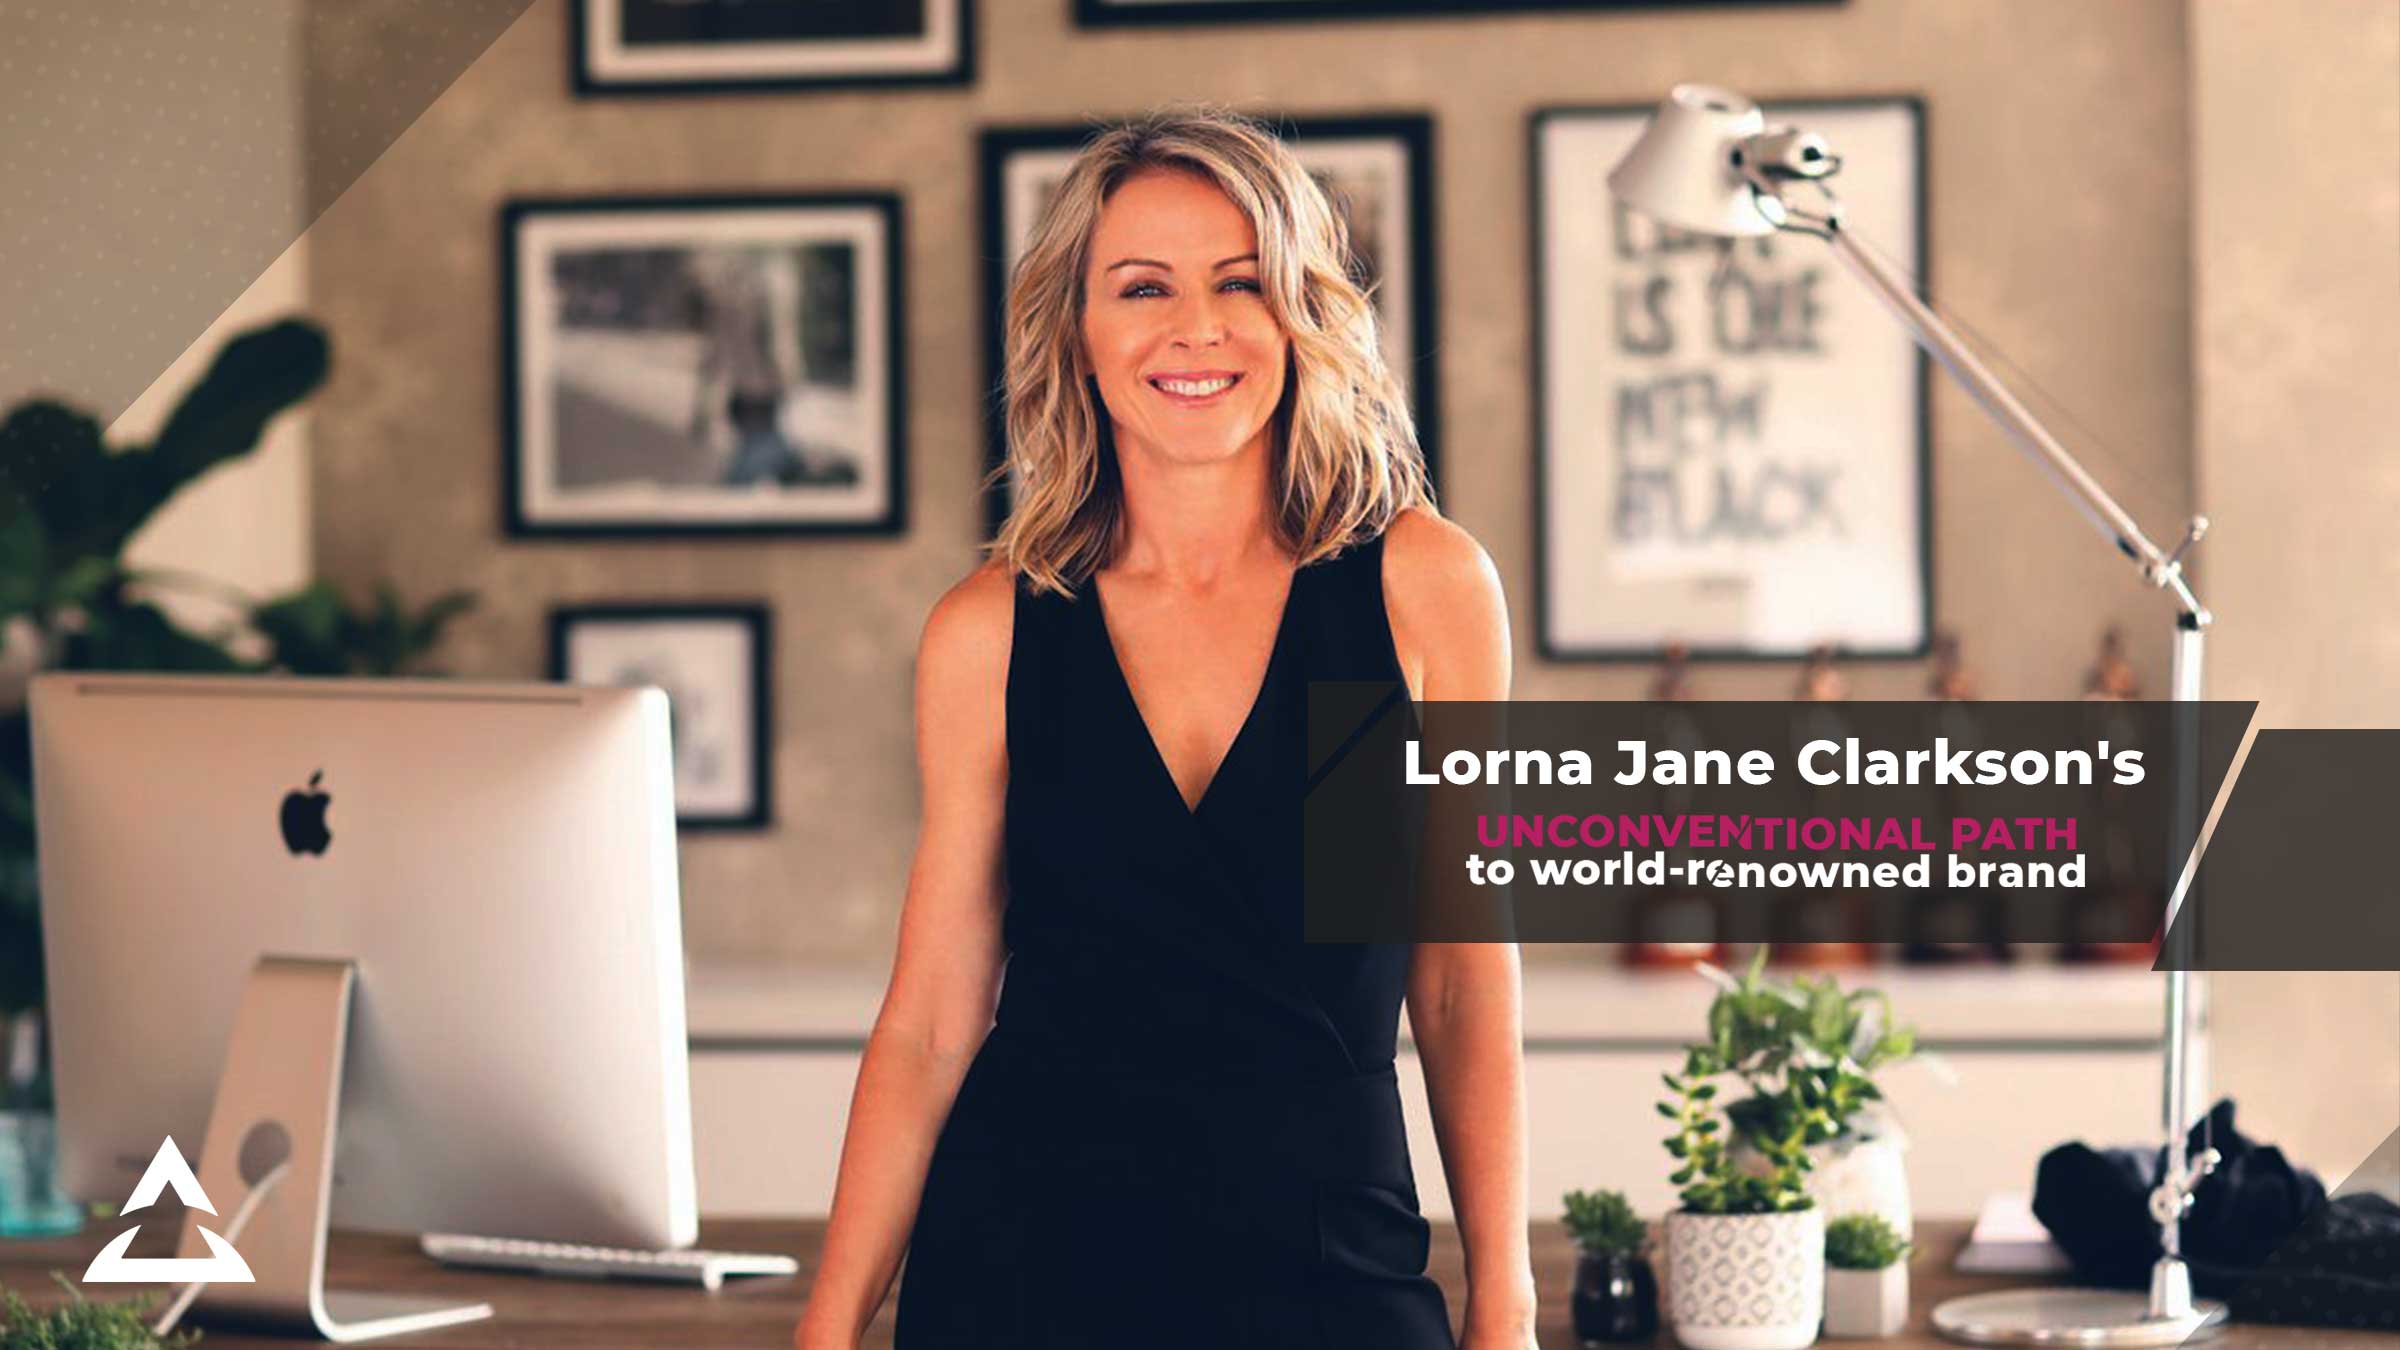 Lorna Jane Clarkson shares how to set healthy and achievable New